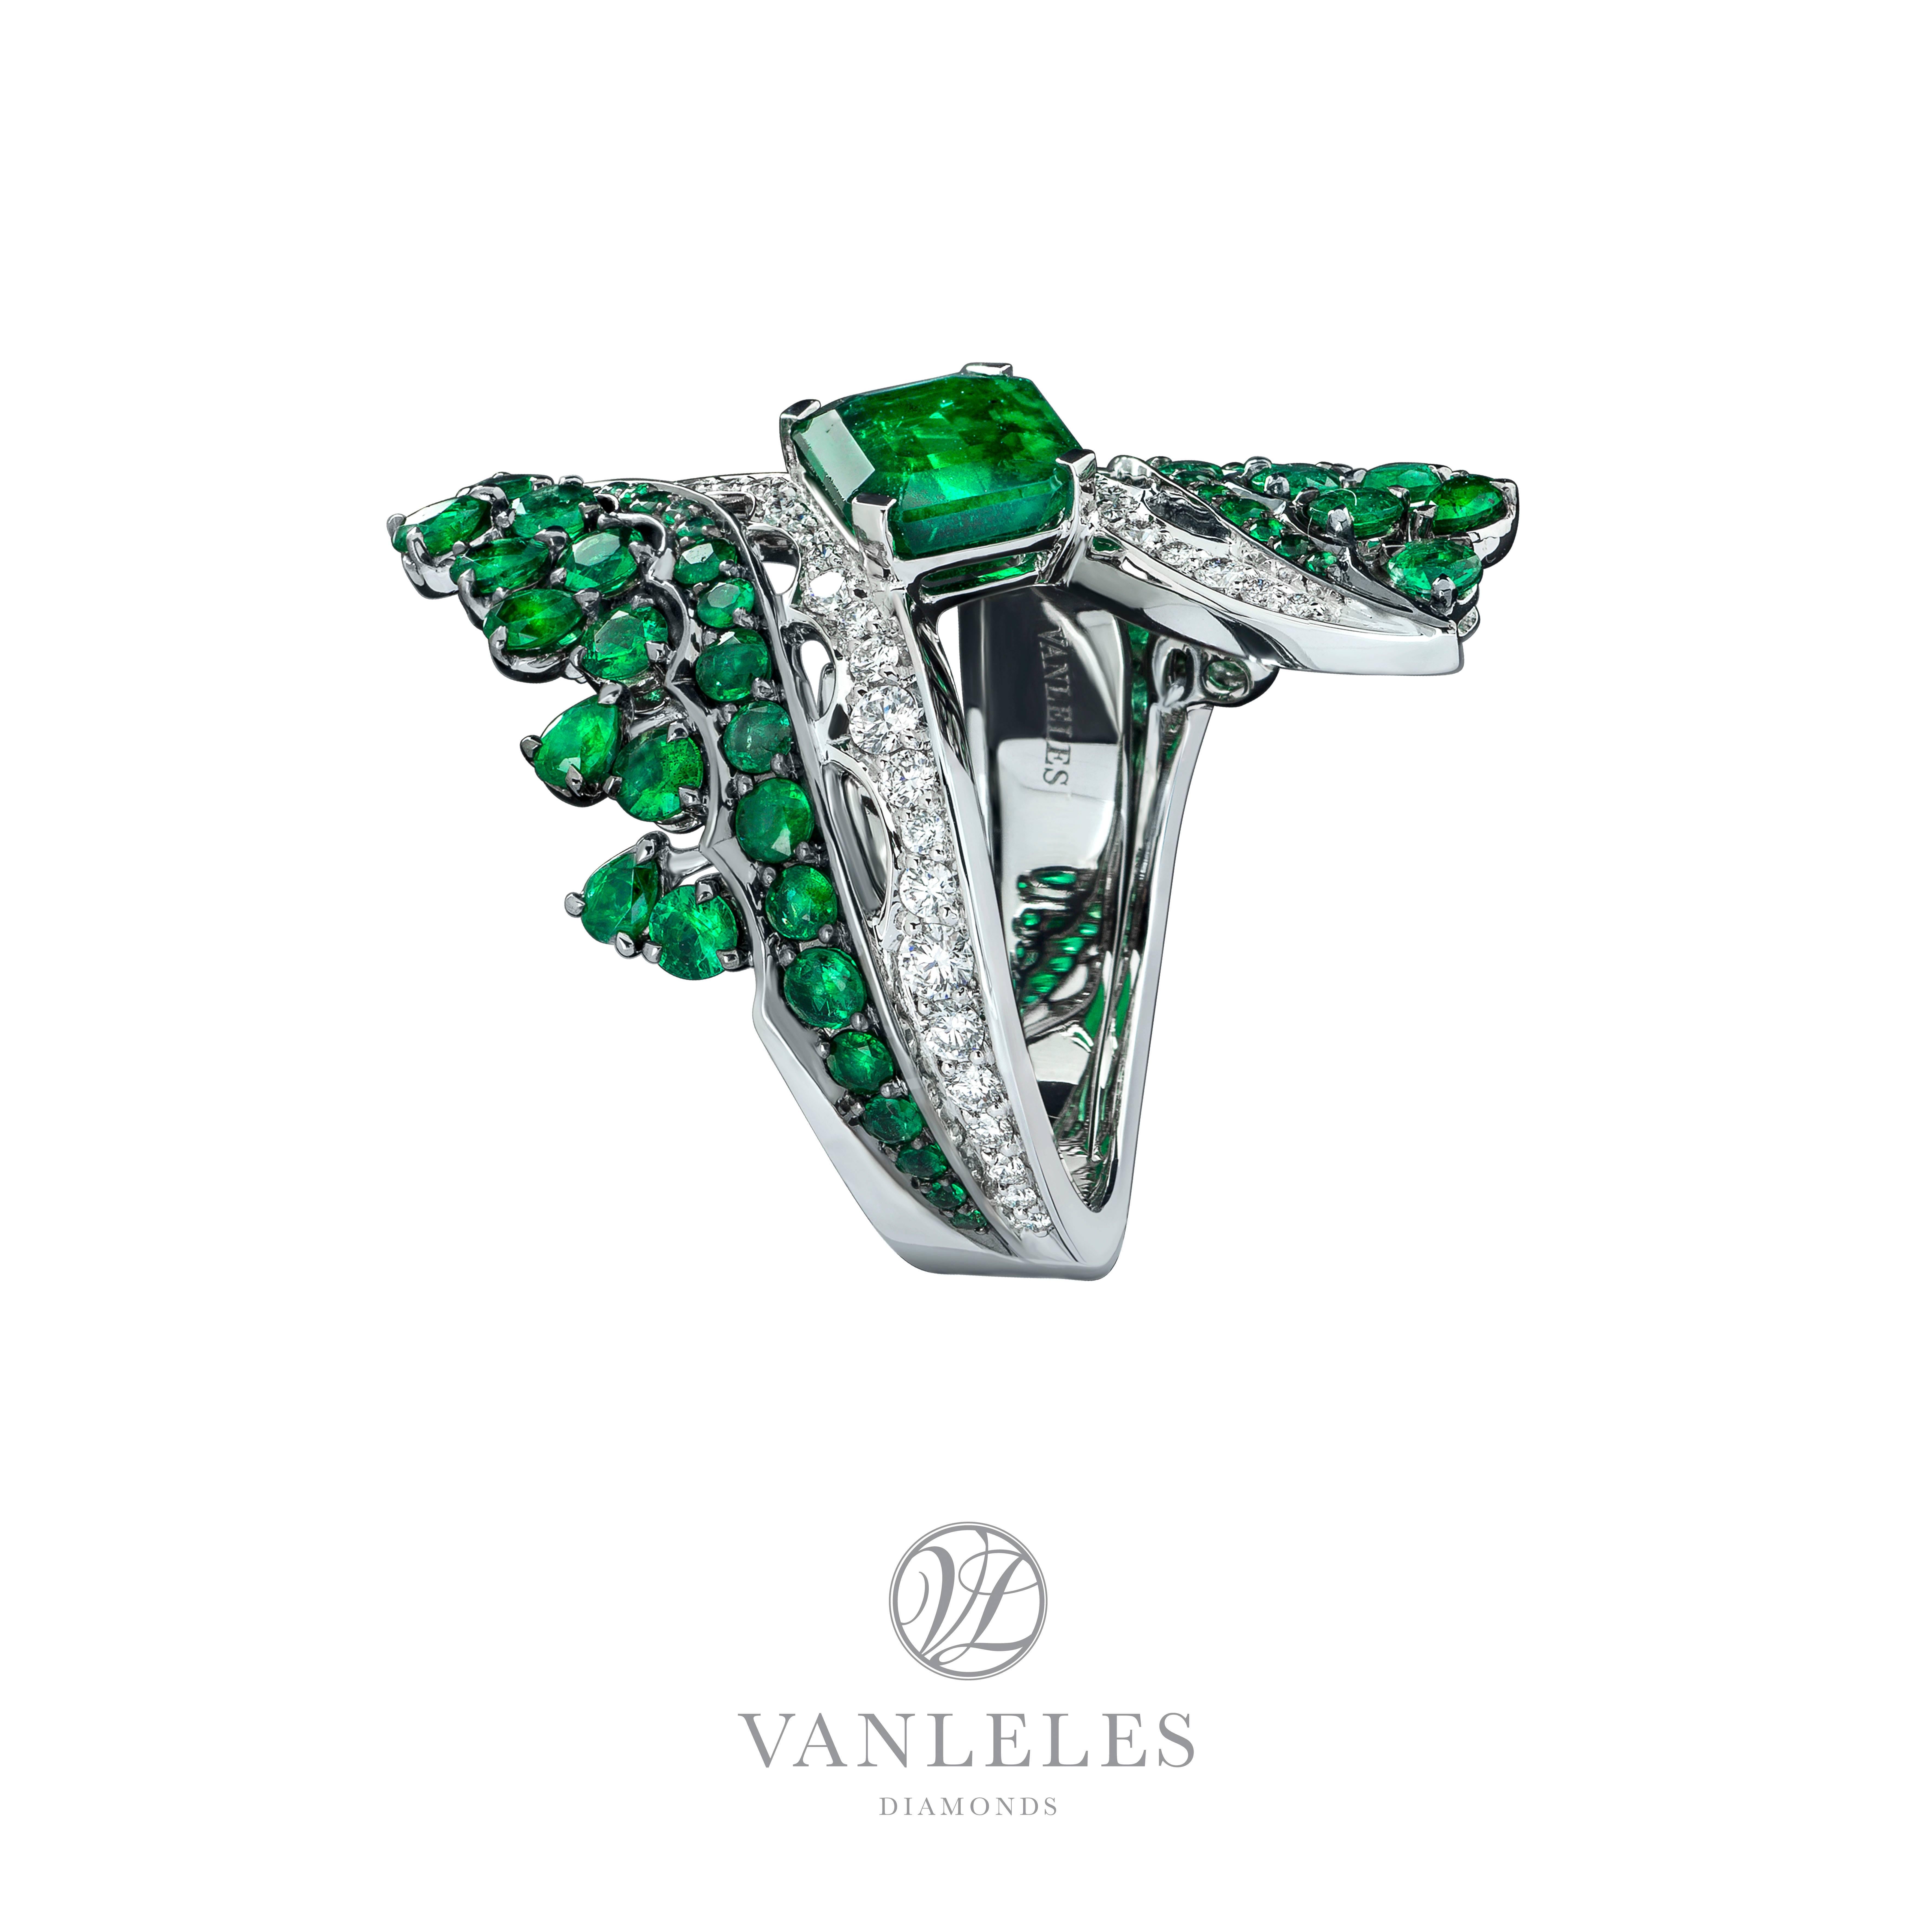 One of a kind ring, part of our iconic heritage collection, Legends of Africa.
Vania celebrates the beauty and strength of her African homeland with intricate designs, infused with the intensity of the finest emeralds and exquisite diamonds.